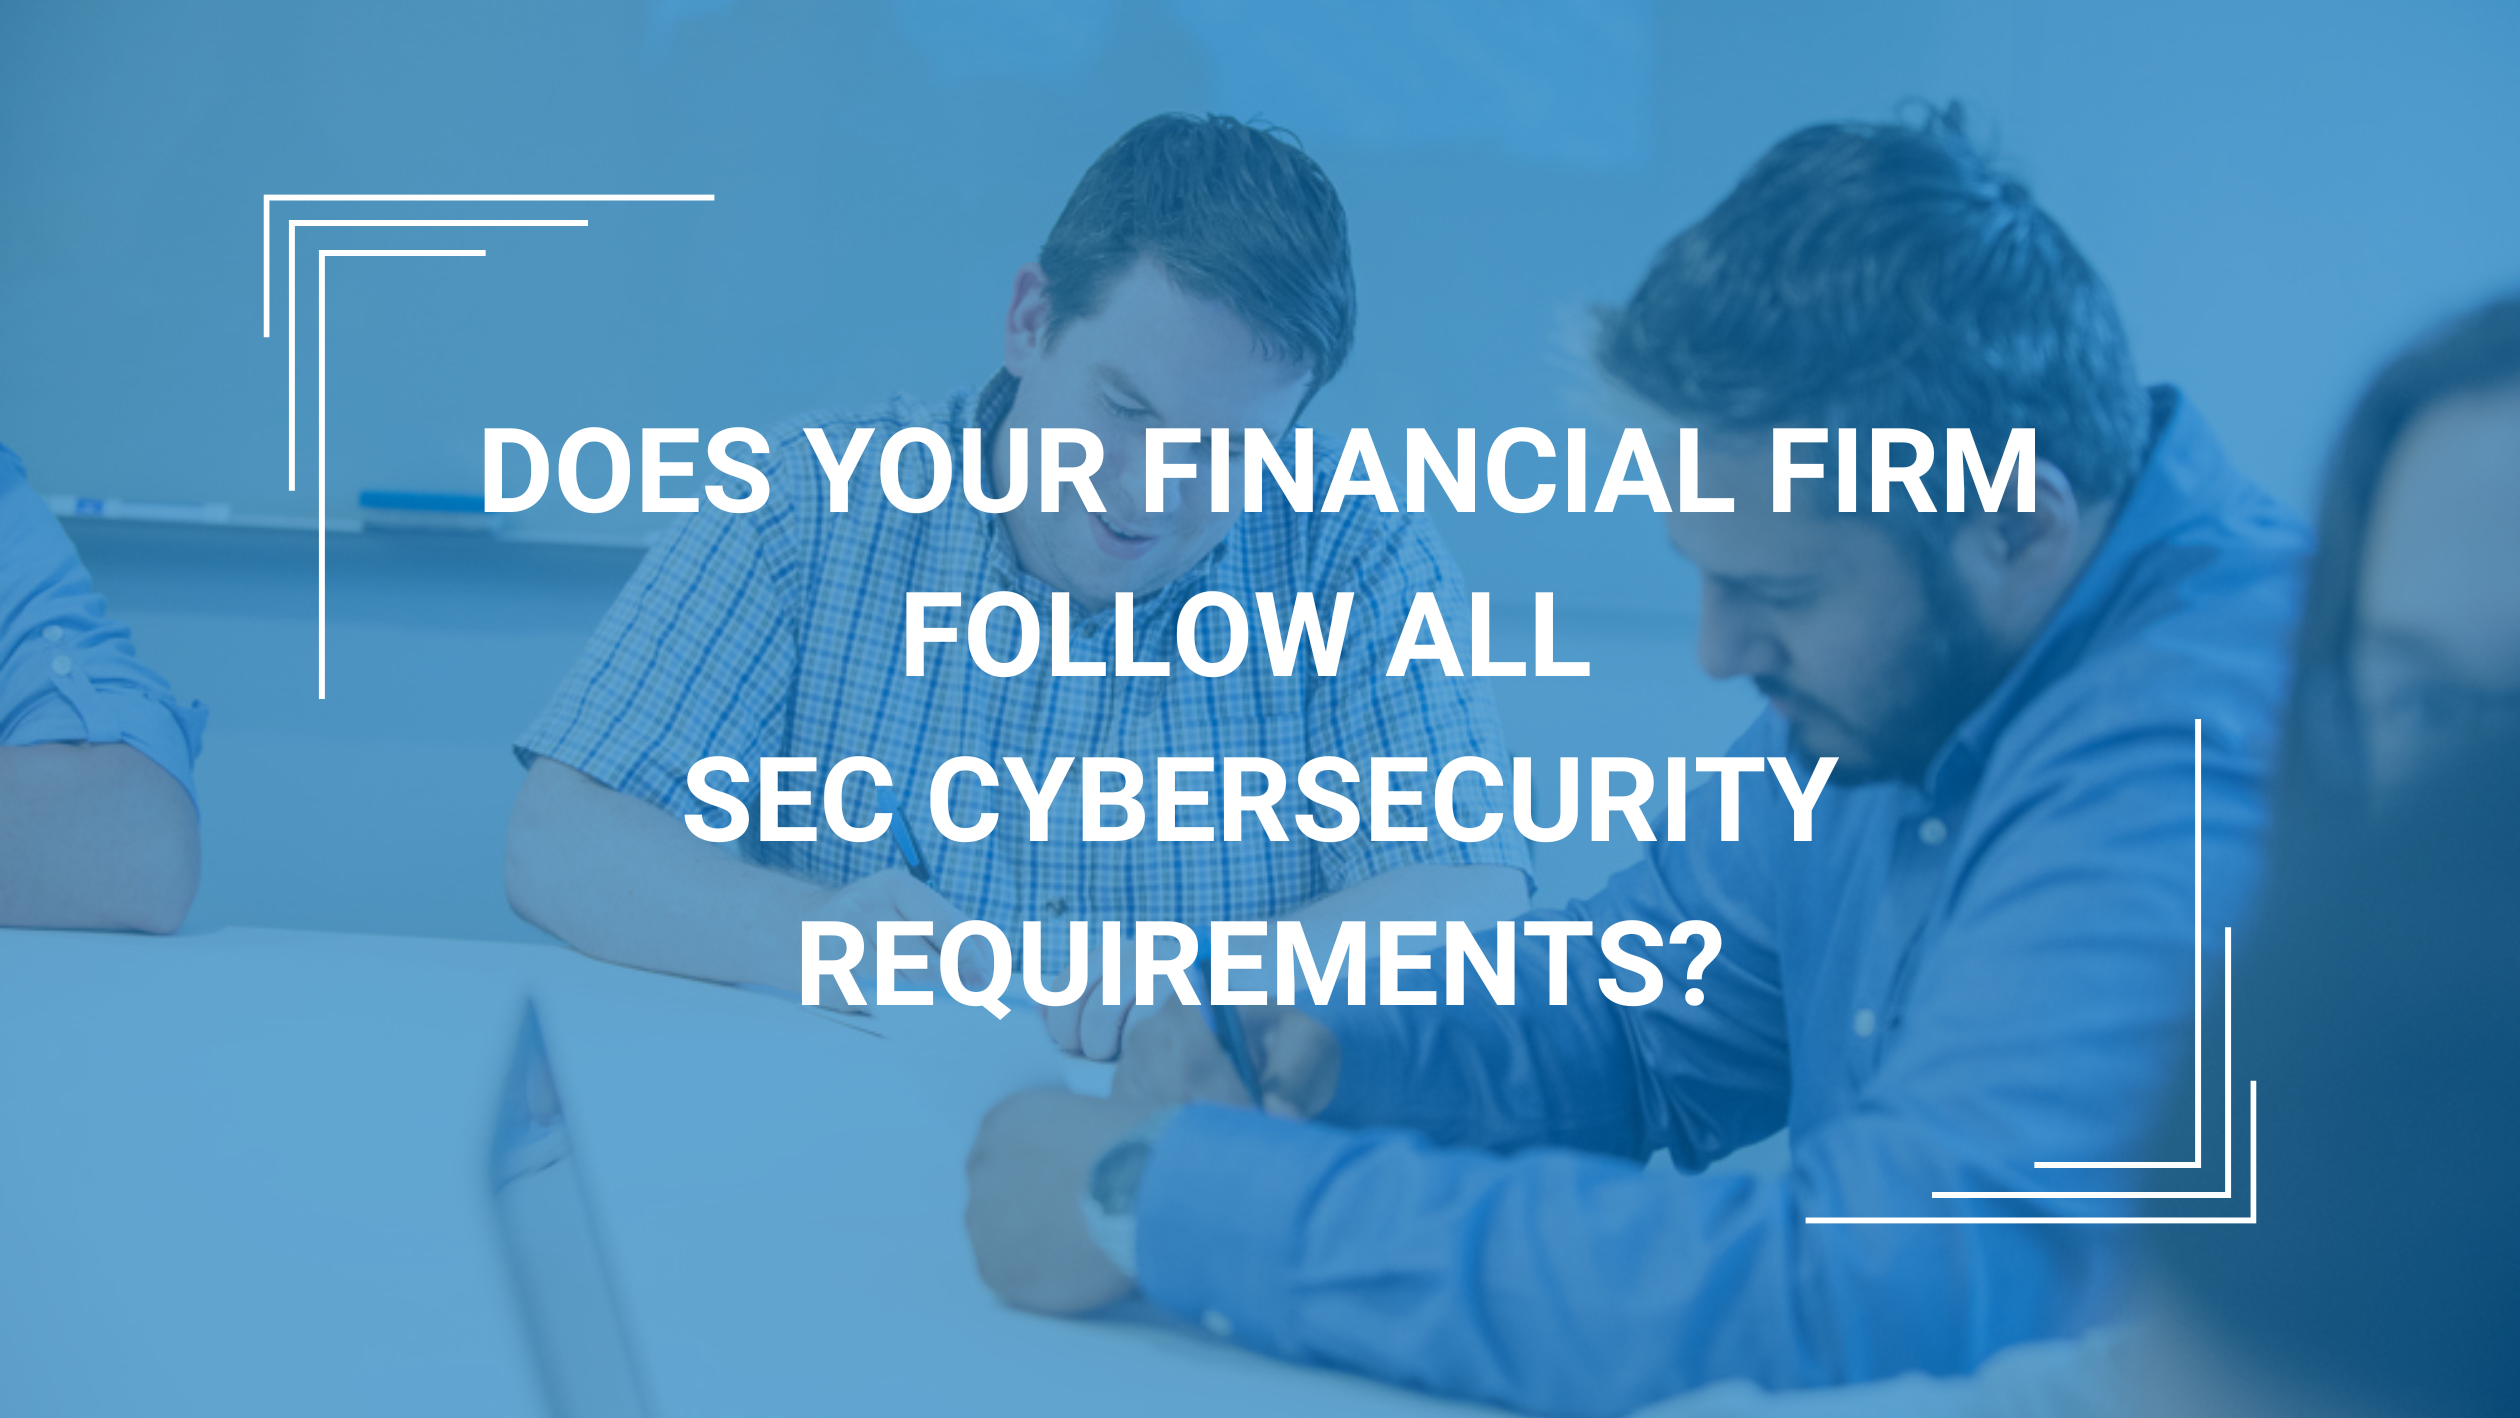 Does Your Financial Firm Follow All SEC Cybersecurity Requirements?